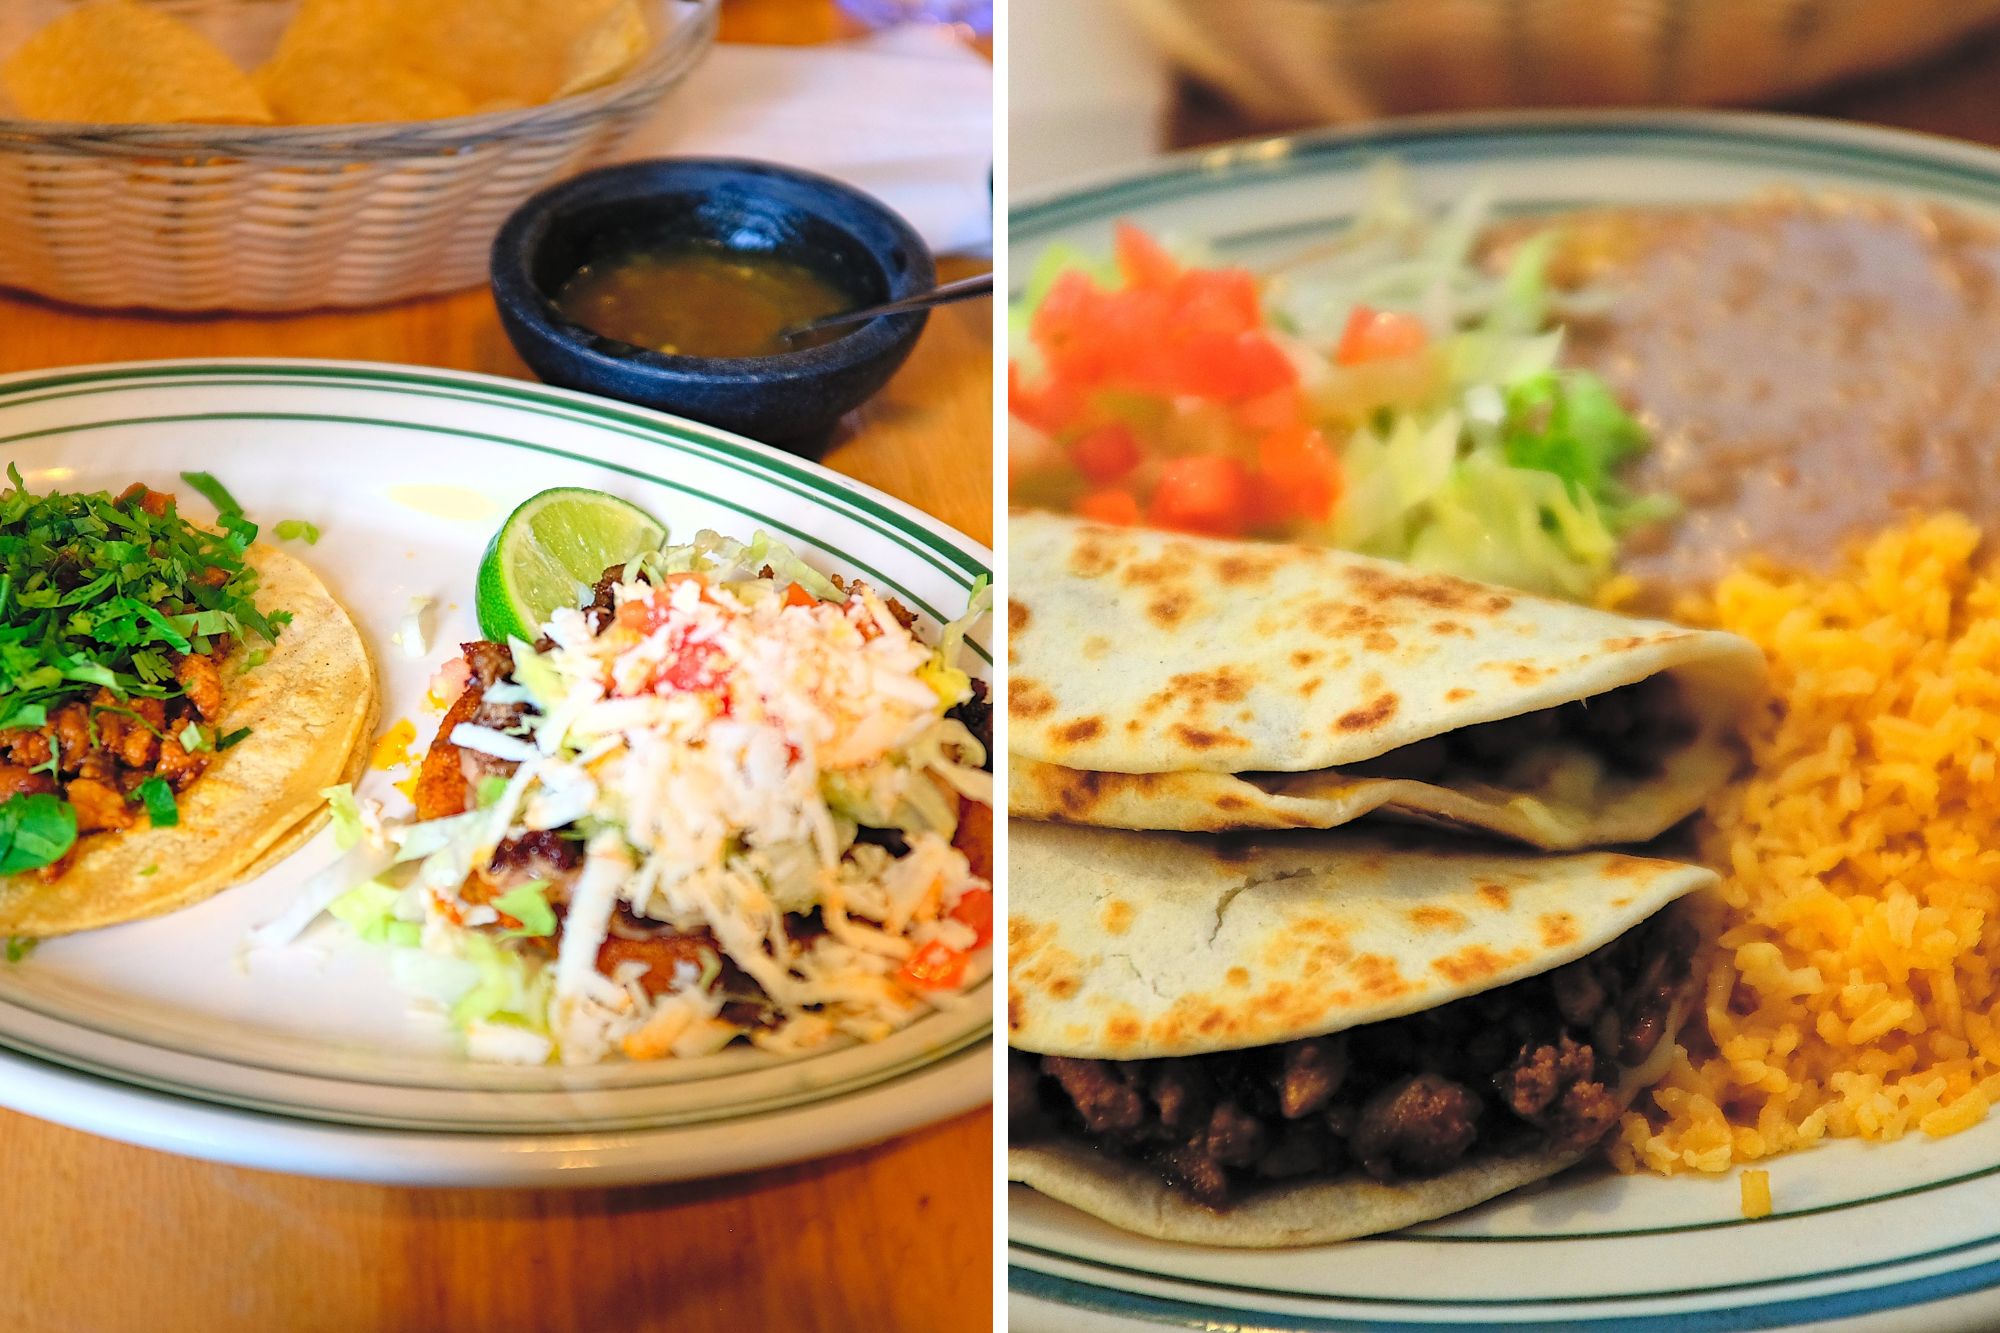 Collage of two lunch plates at Guadalajara Restaurant